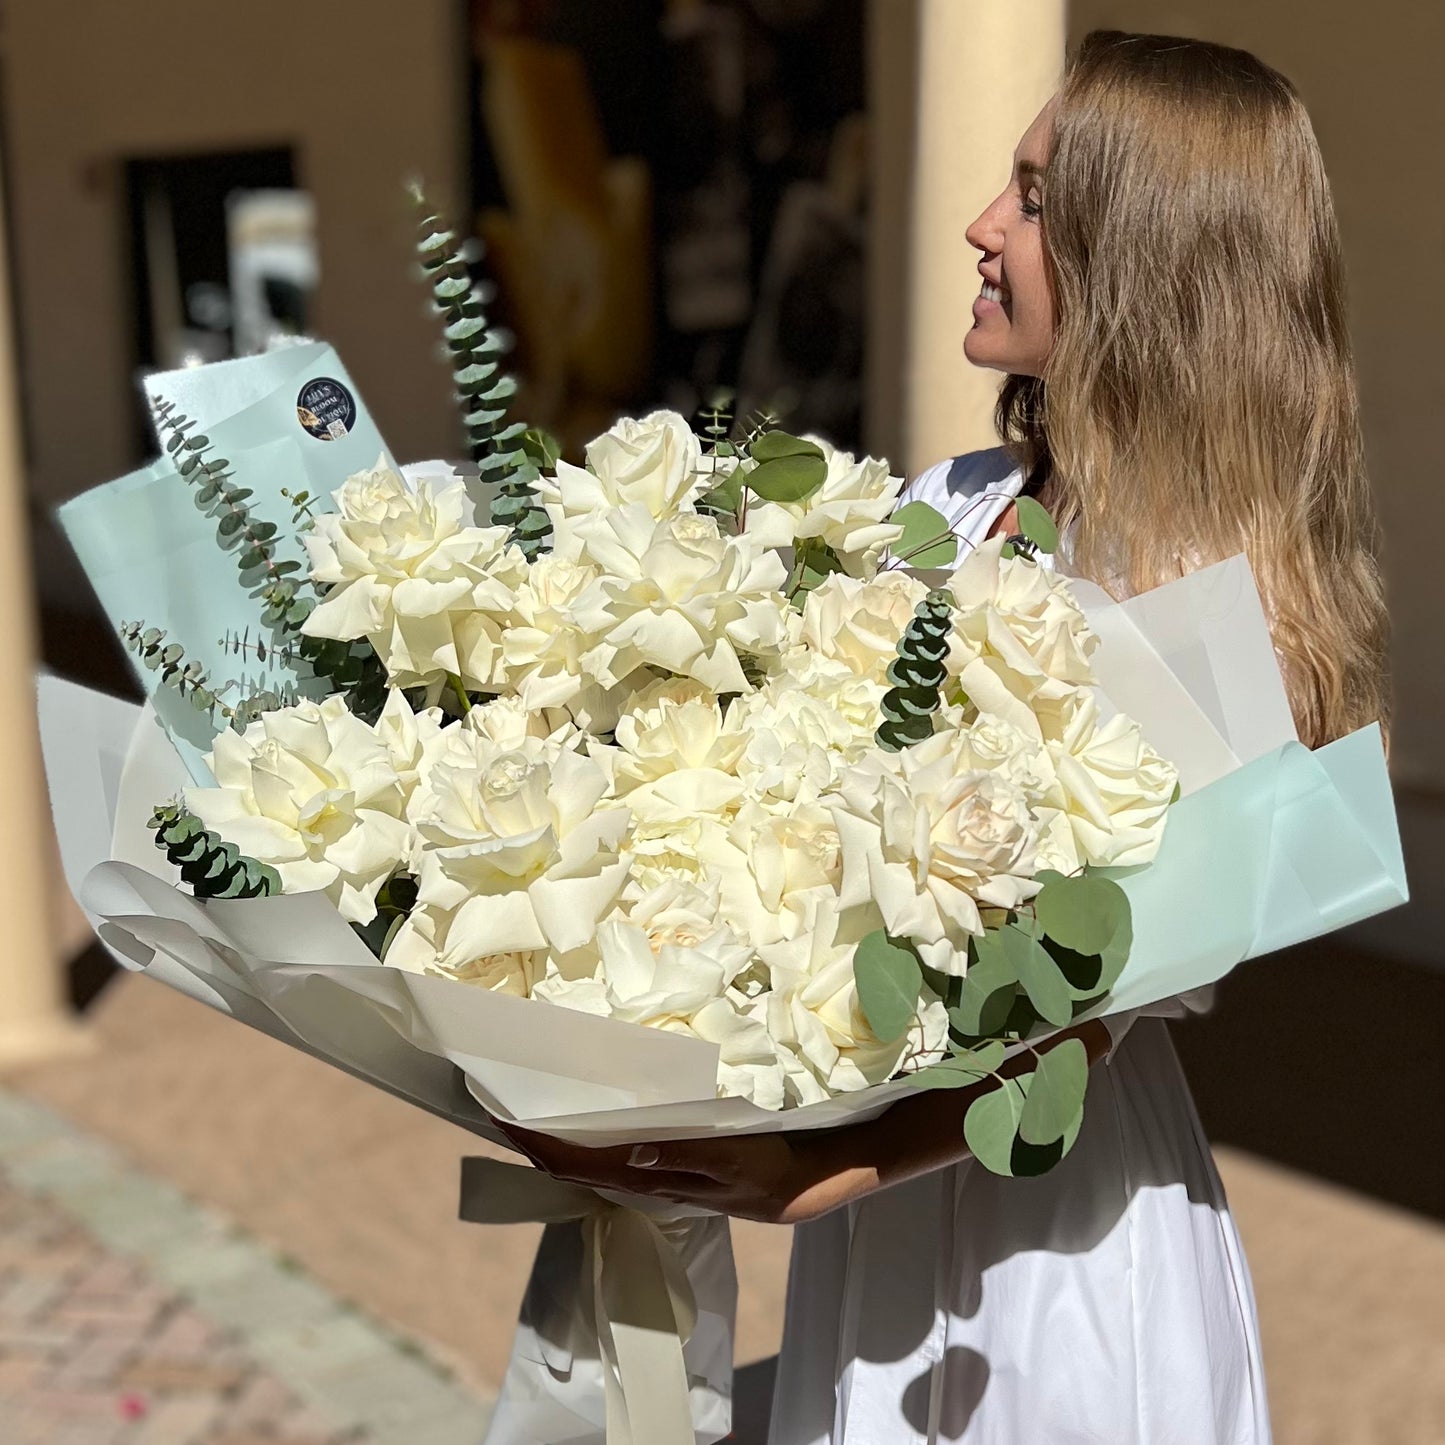 A woman carrying a large white bouquet of premium roses